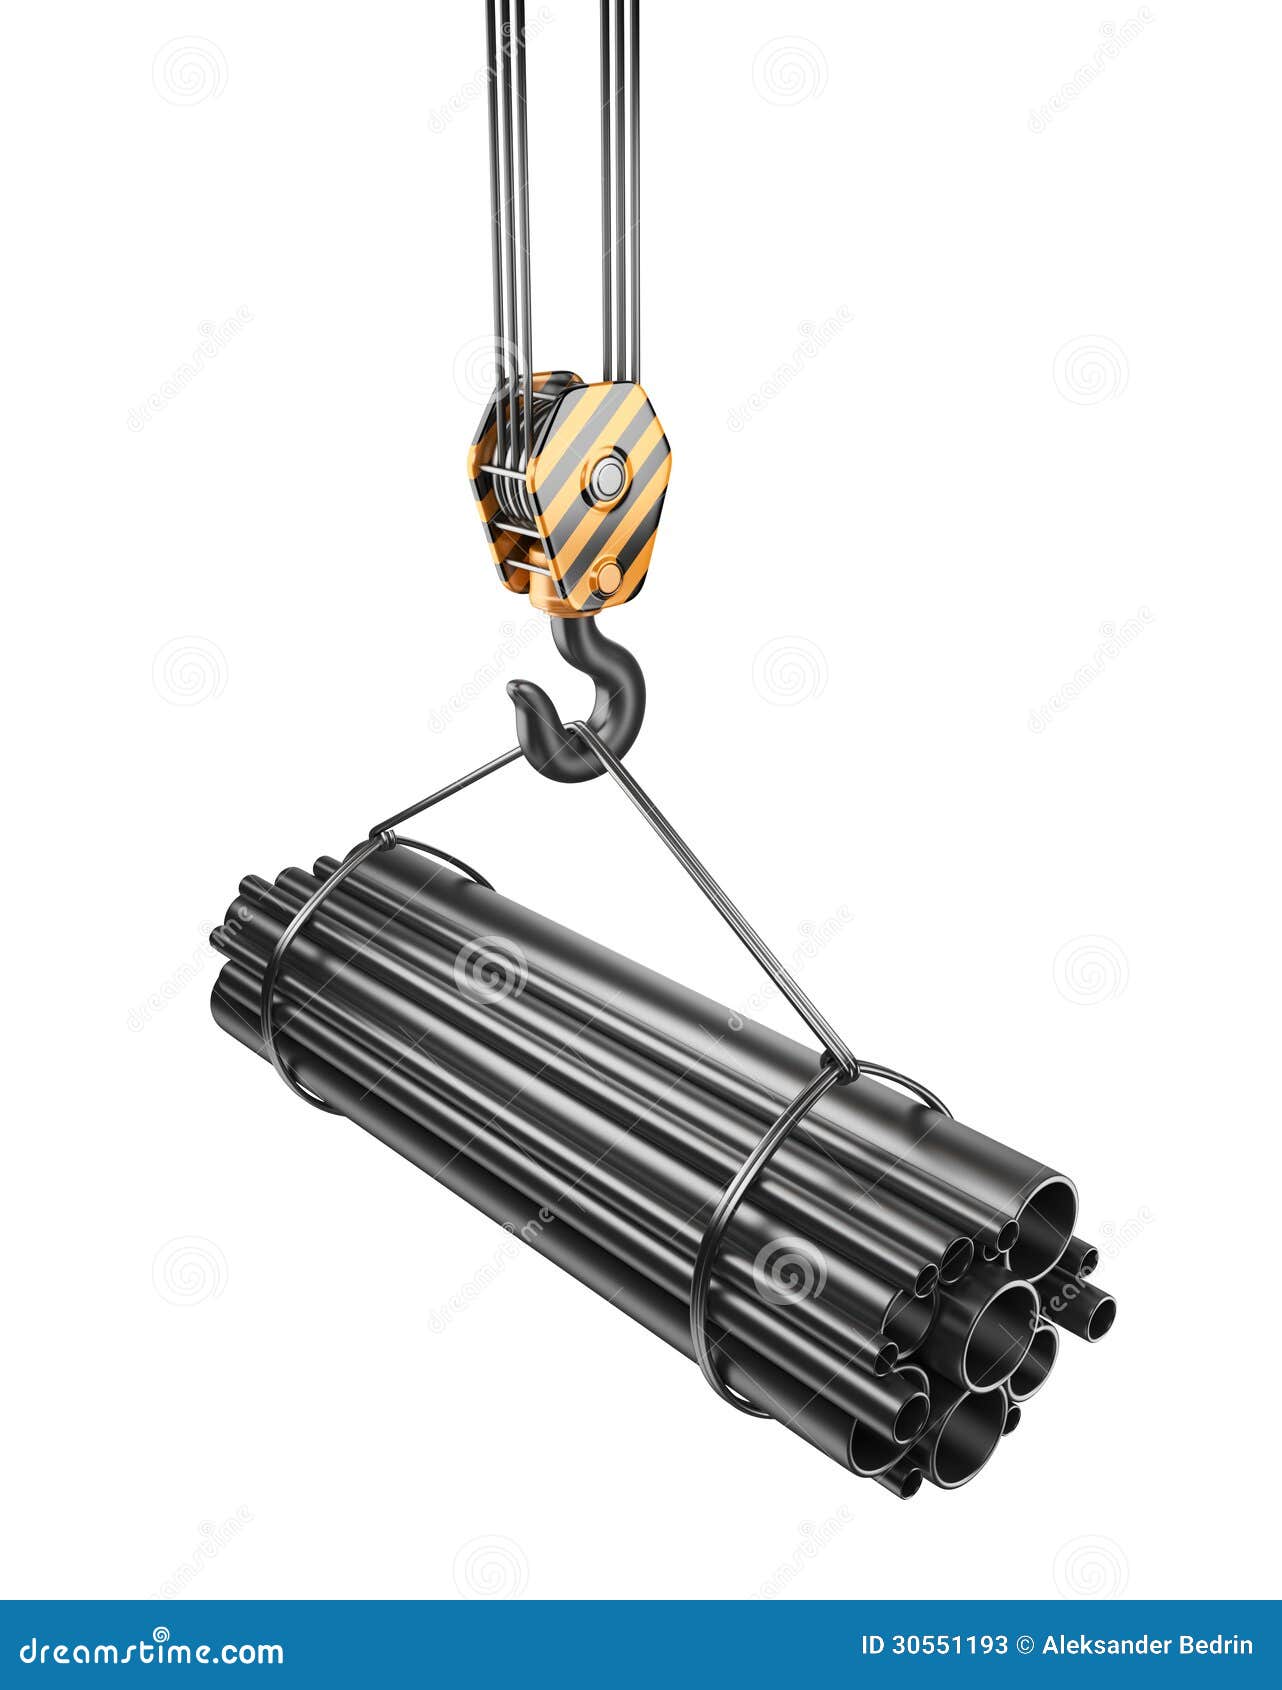 https://thumbs.dreamstime.com/z/crane-hook-steel-pipes-d-isolated-white-background-30551193.jpg